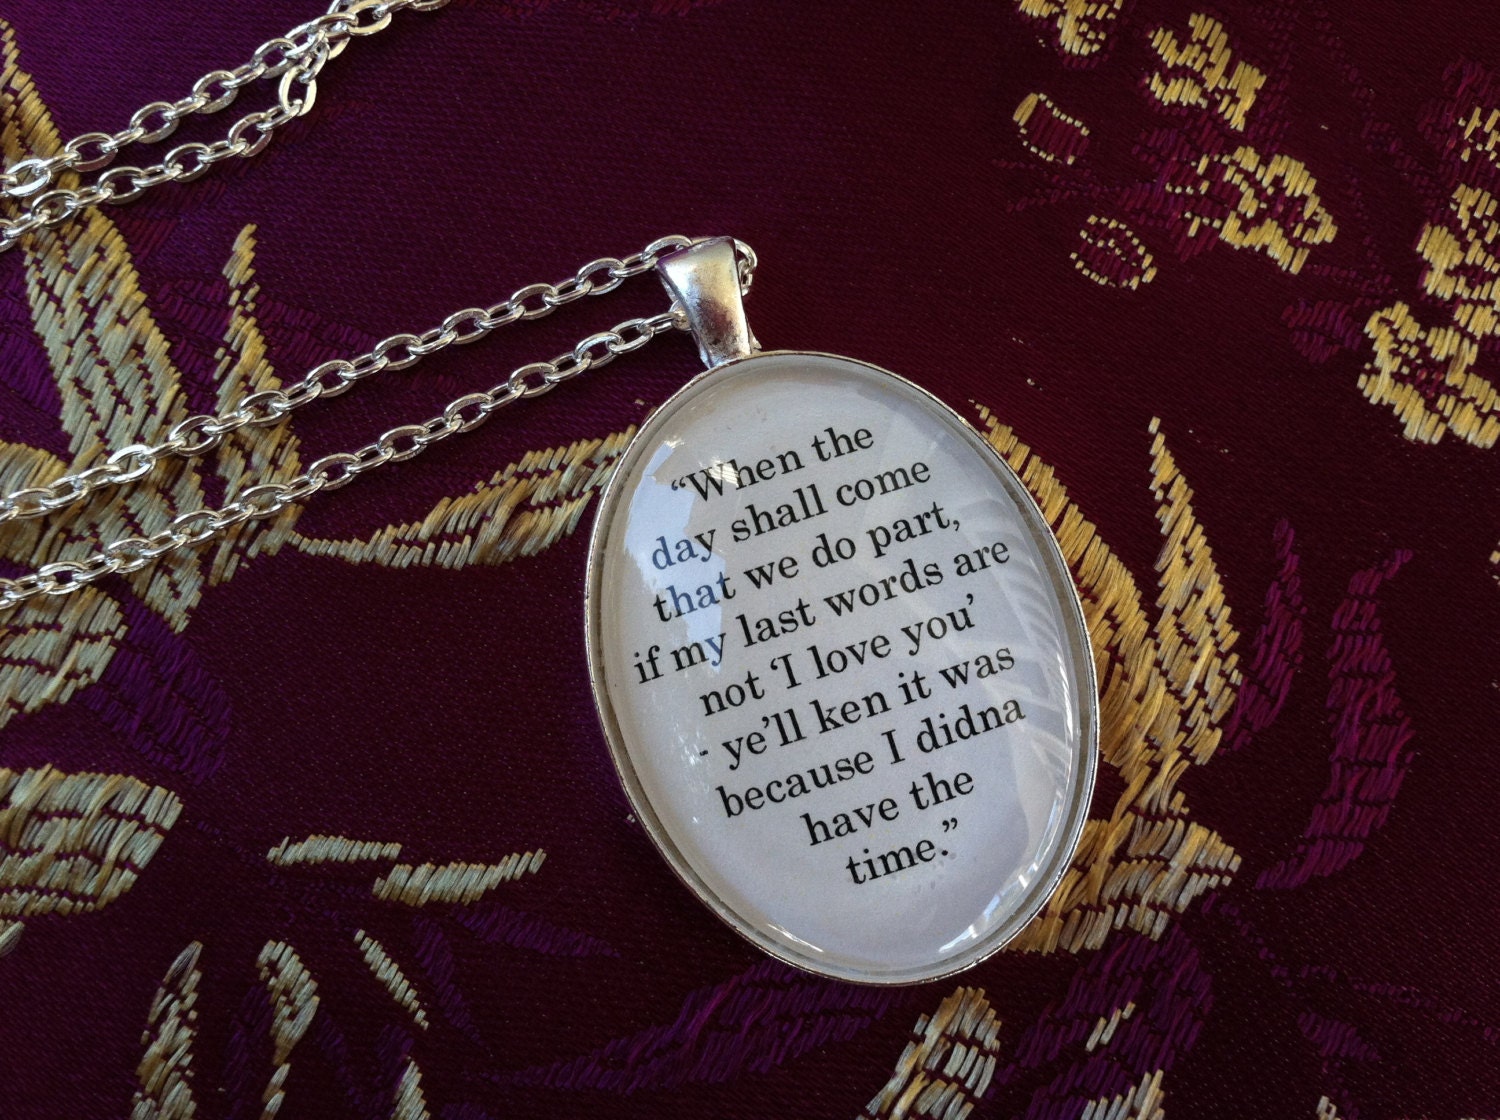 Outlander If my last words are not I love you Book Quote Charm Oval Pendant Necklace Diana Gabaldon